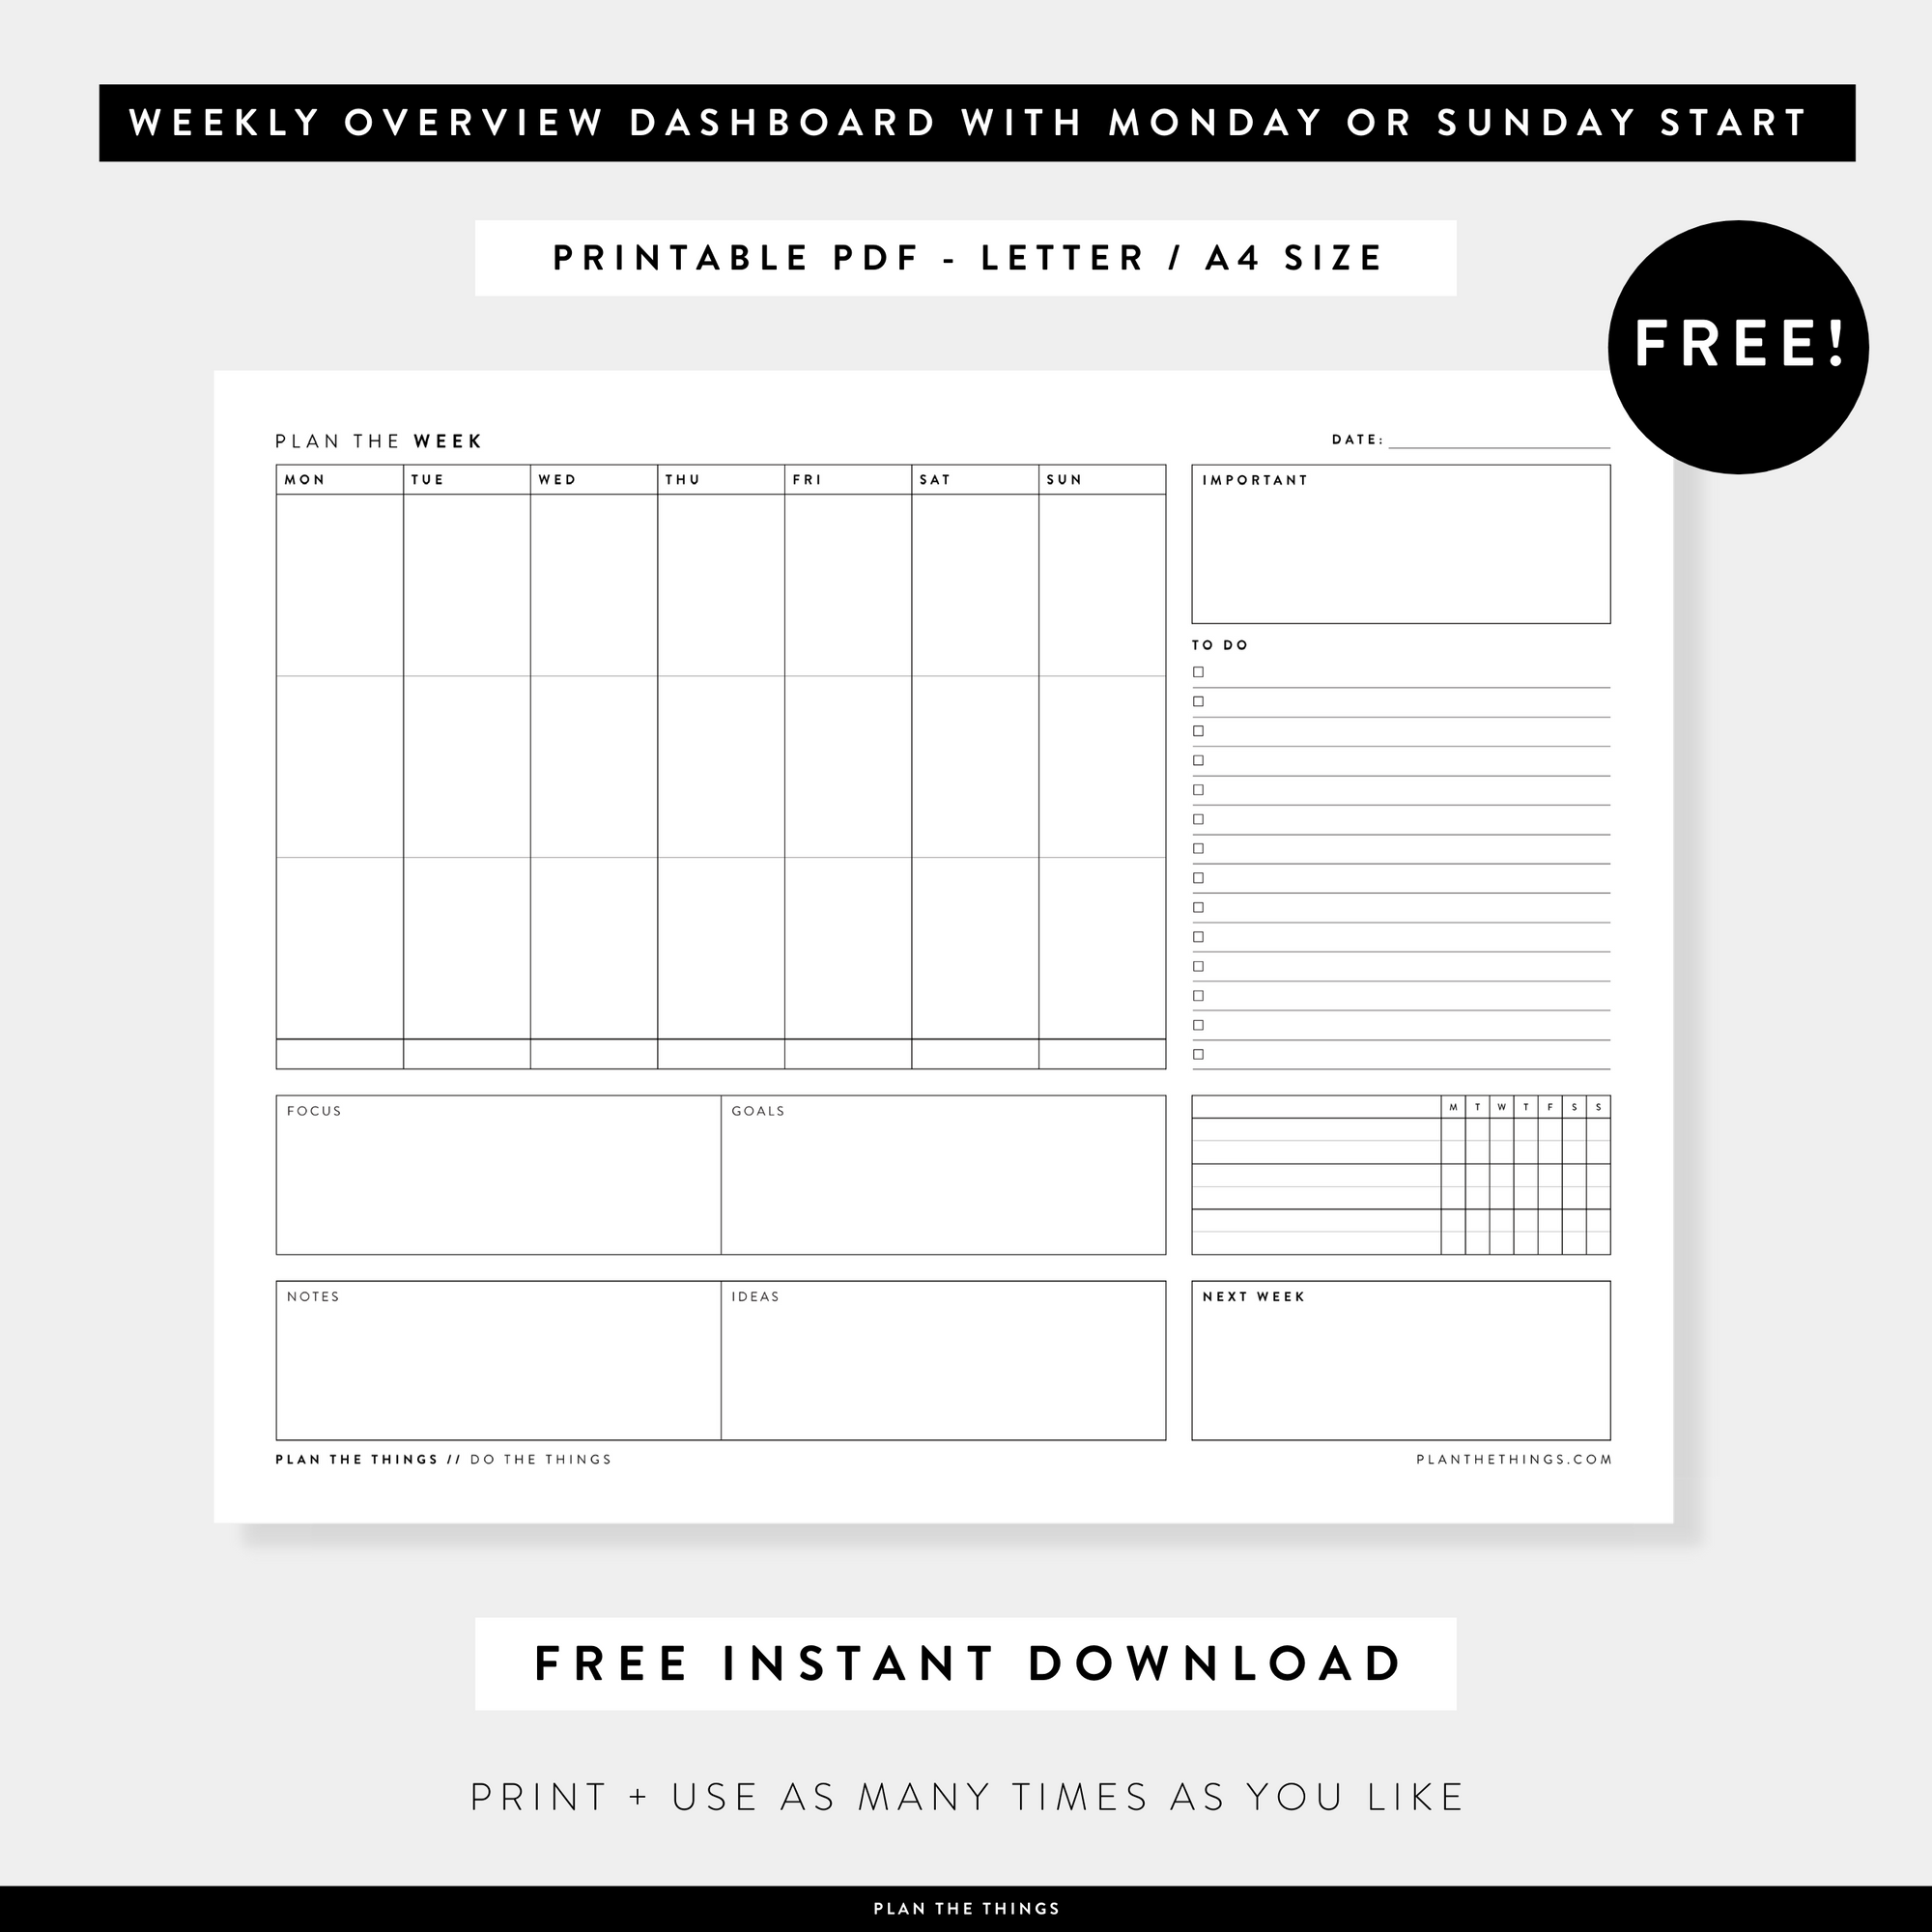 OVERWHELMED BY YOUR WEEK BEFORE IT EVEN BEGINS? YOU NEED THIS FREE WEEKLY OVERVIEW PLANNER PRINTABLE